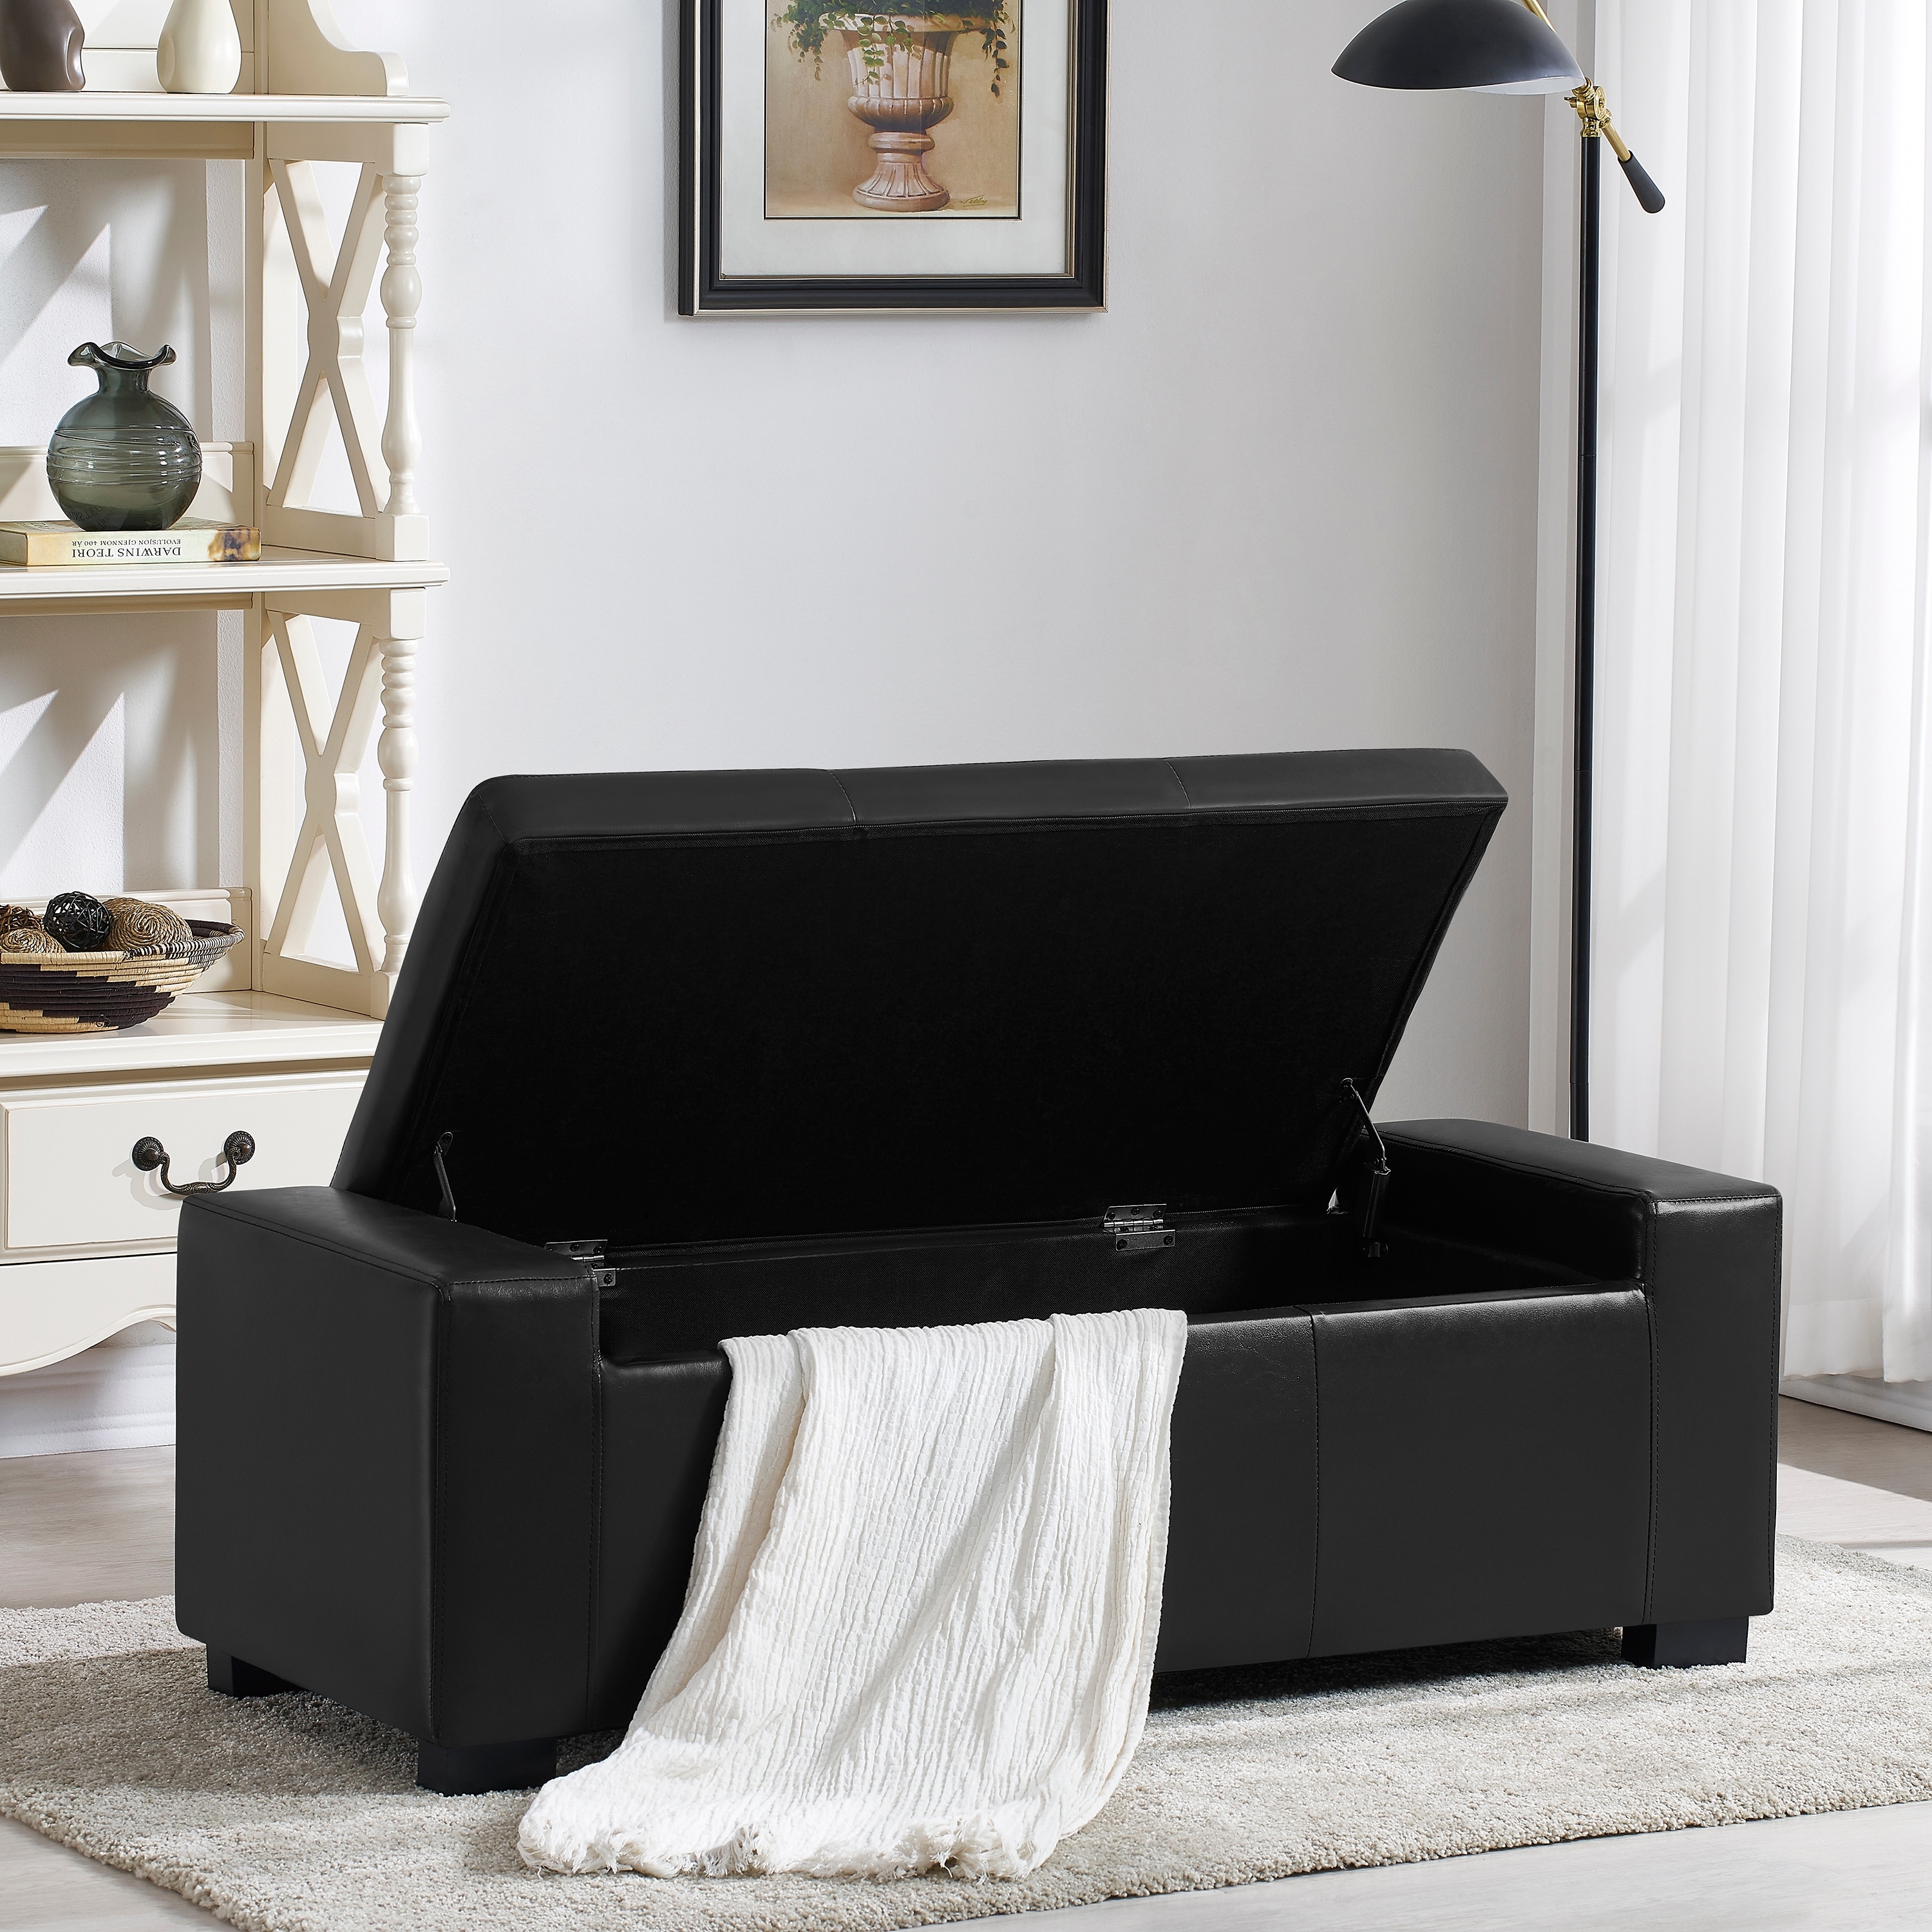 https://ak1.ostkcdn.com/images/products/is/images/direct/1979a8205af859e450bc415d4ac806776277b157/Multipurpose-Upholstery-Storage-Foot-Rest-Sofa-Stool%2C-Black.jpg